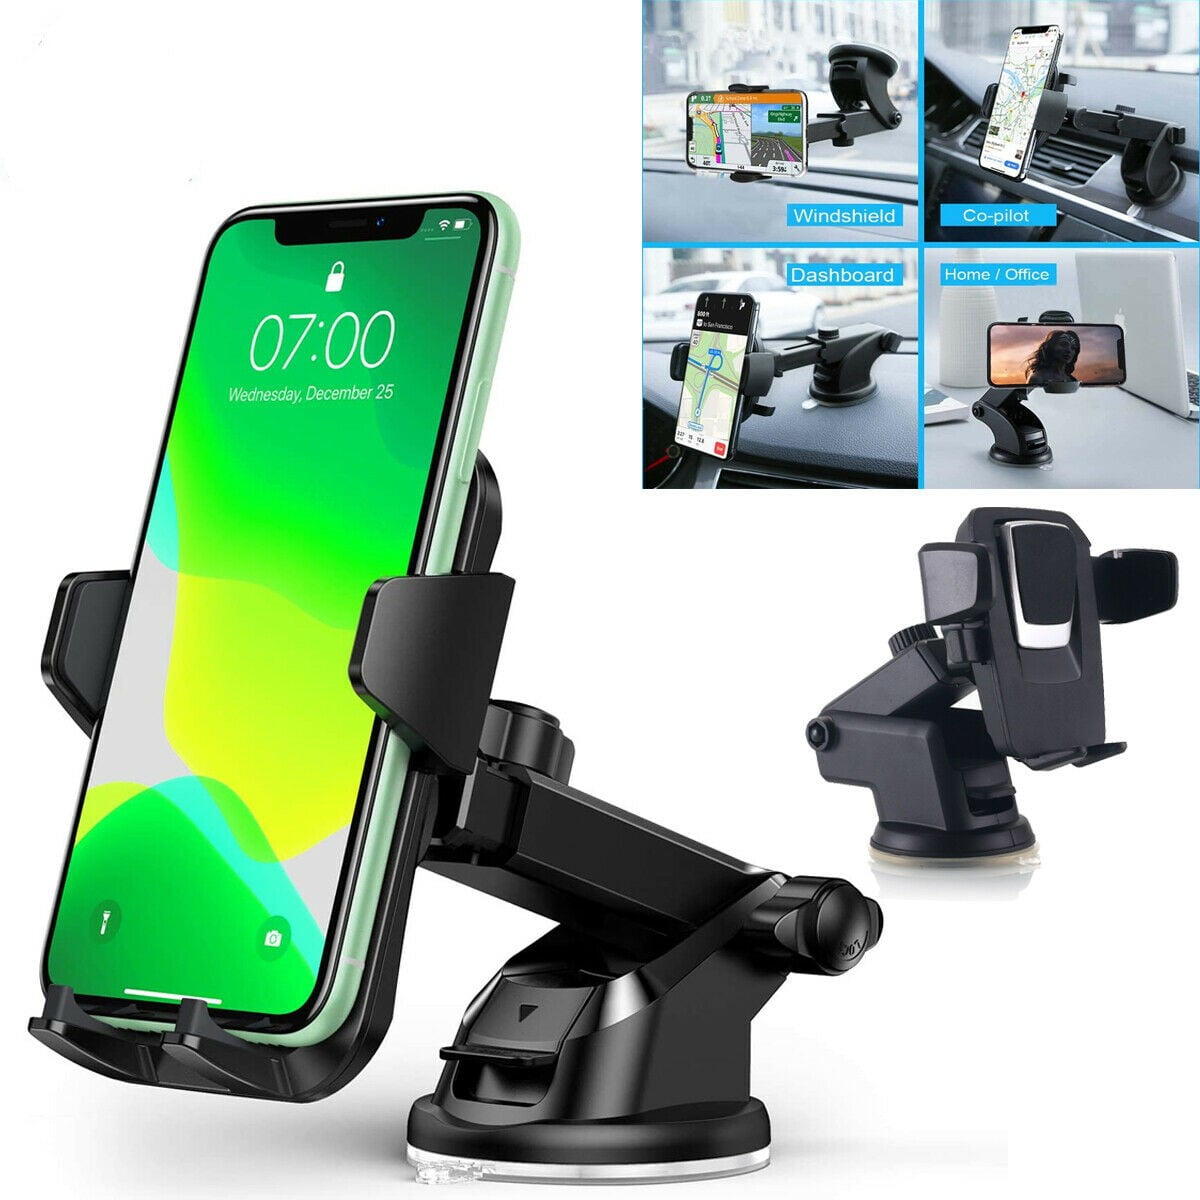 Andobil Car Phone Mount Easy Clamp, Double Locking Suction Cup Phone Holder for Car Dashboard Air Vent Windshield Cell Phone Car Mount Fit for iPhone 12 11 Pro SE XR XS Max 8 Plus Samsung S20 S21